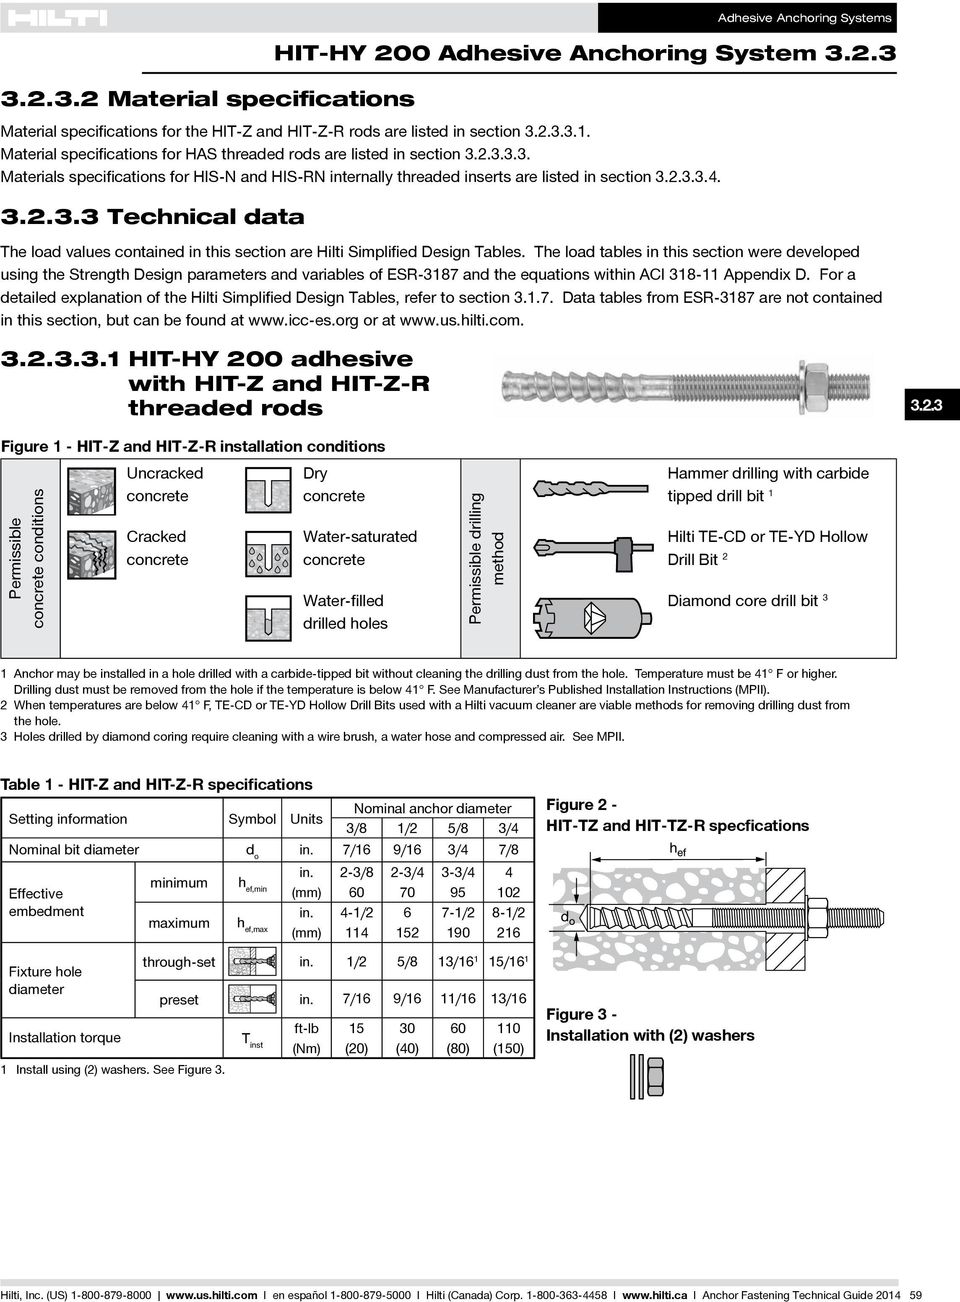 The load tables in this section were developed using the Strength Design parameters and variables of ESR-3187 and the equations within ACI 318-11 Appendix D.